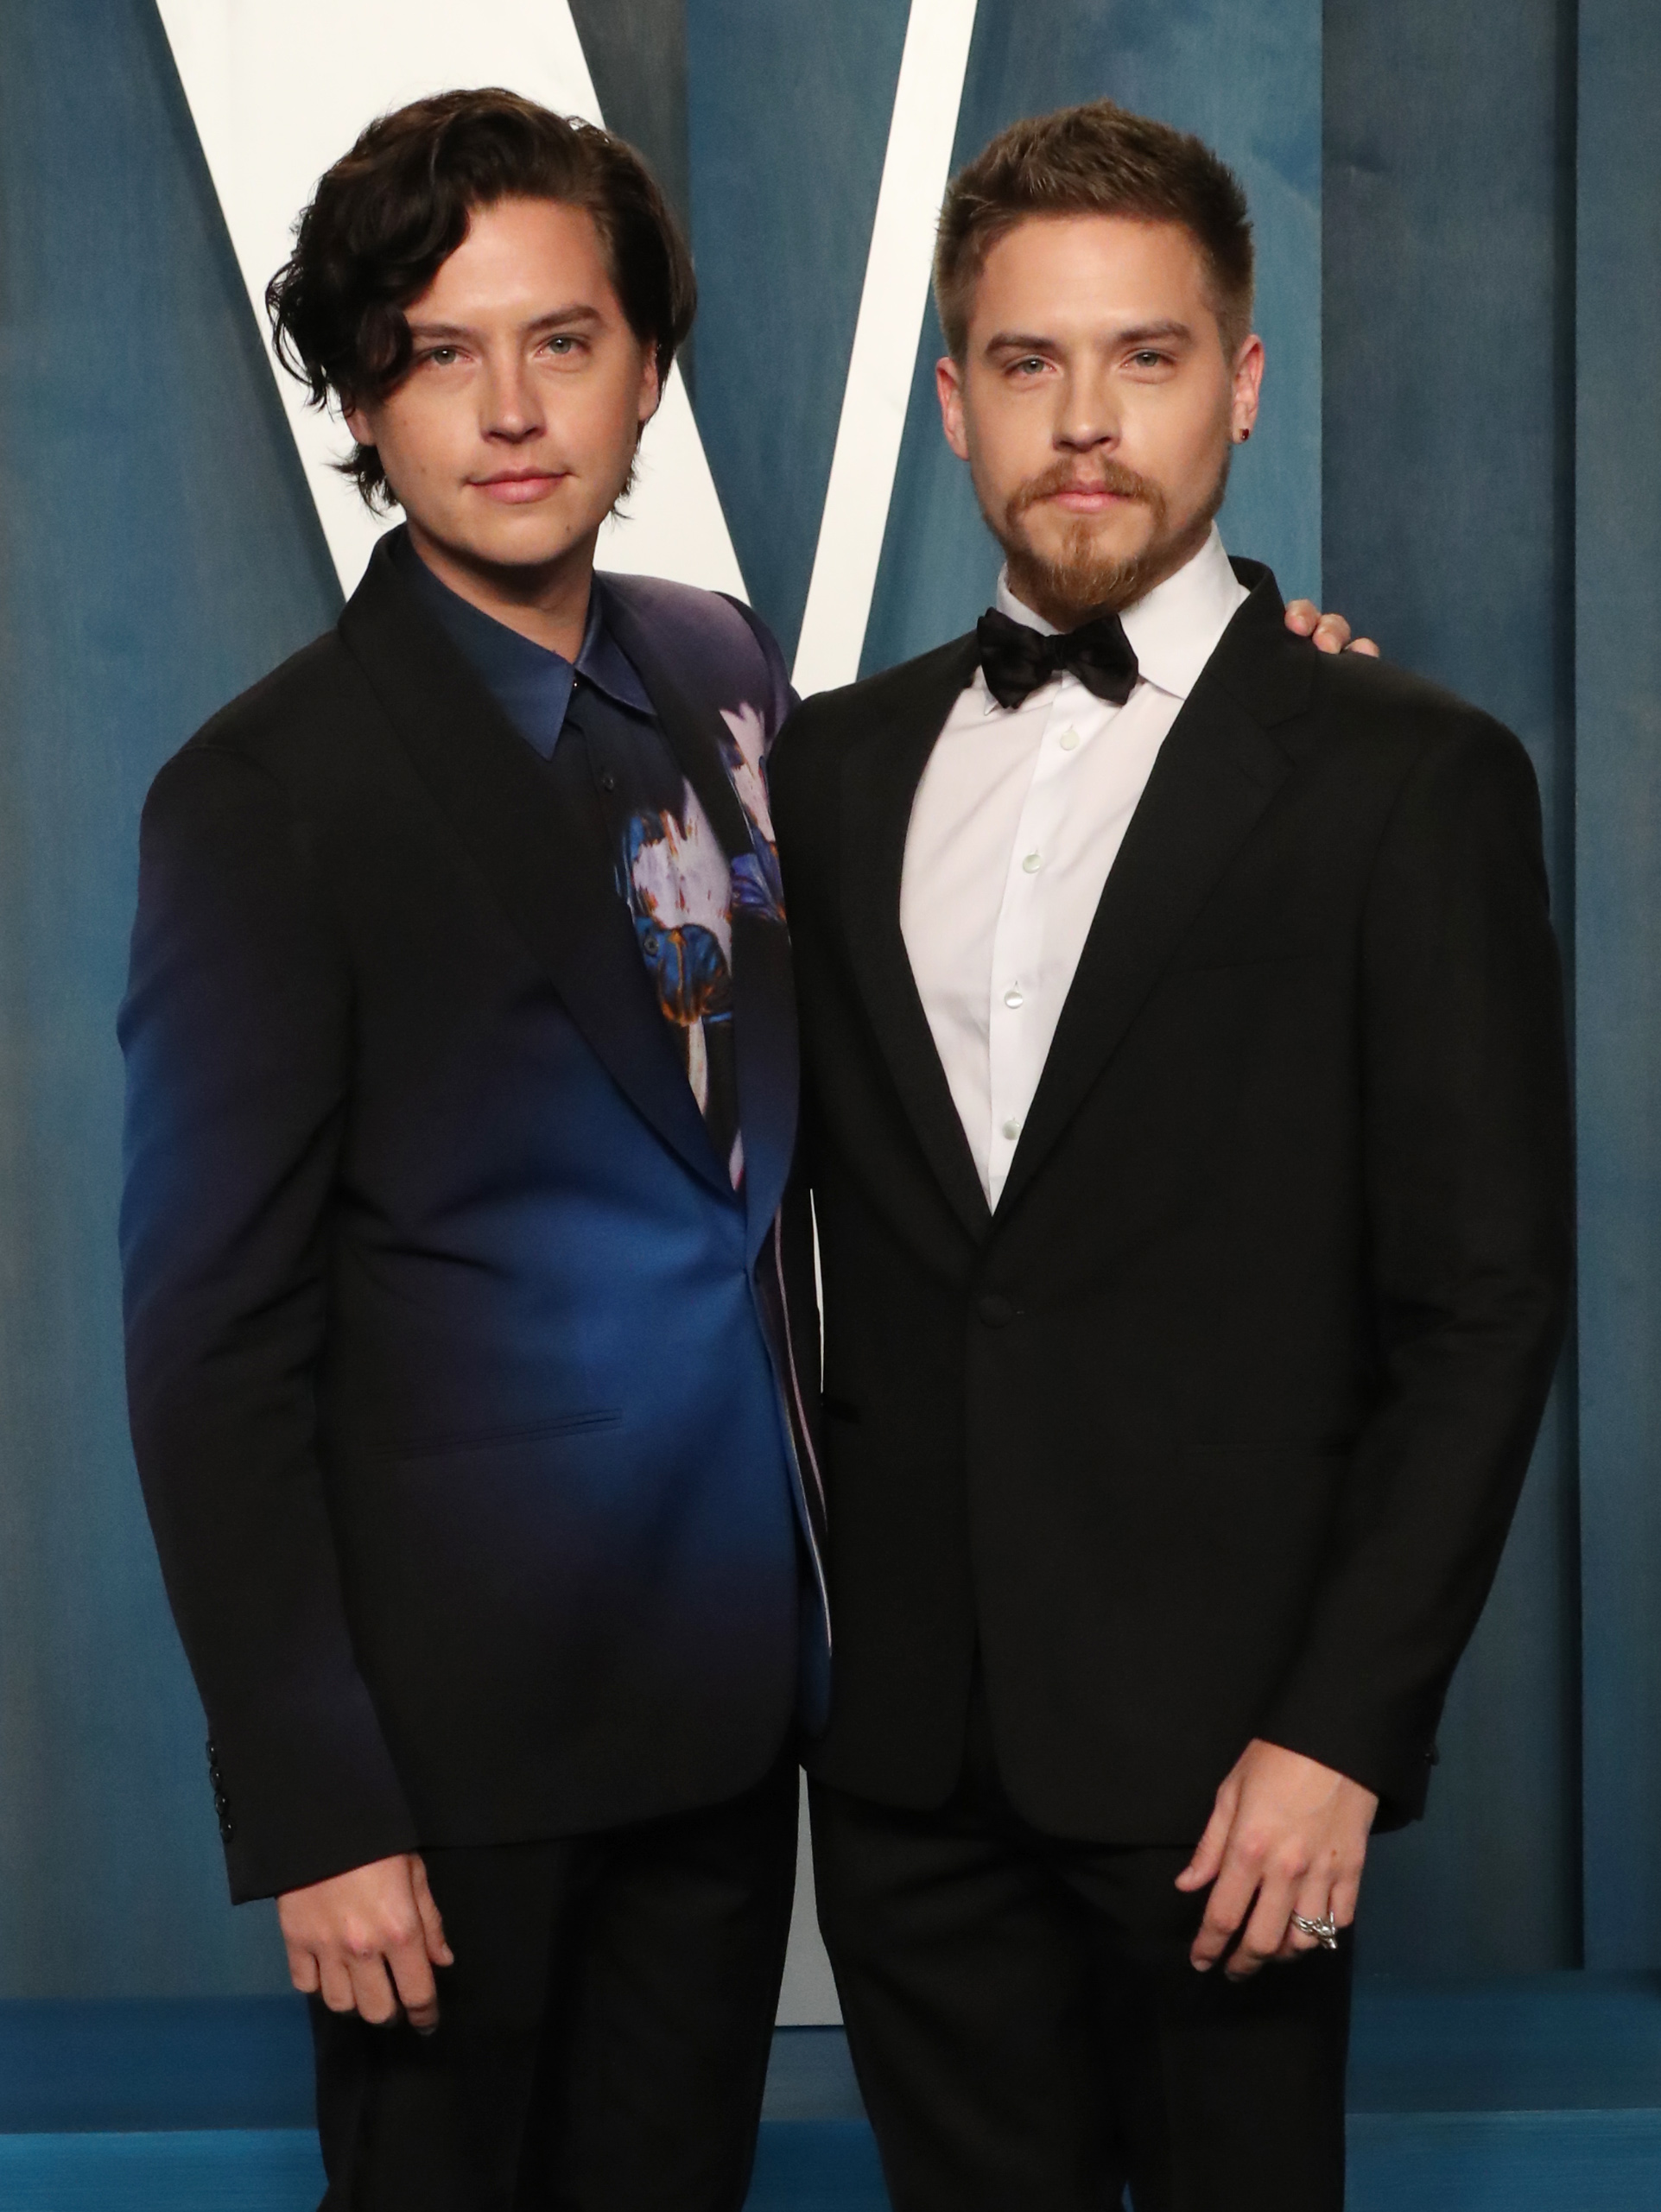 <p>Today, the Sprouse twins are doing quite well. After wrapping up "Suite Life on Deck," Cole Sprouse and Dylan Sprouse enrolled at New York University where they earned bachelor's degrees in humanities and video game design, respectively. In 2016, Cole landed the role of Jughead Jones on the CW series "Riverdale." Cole also found love with co-star Lili Reinhart, who plays Betty Cooper, whom he dated until 2020; he's been dating model Ari Fournier since 2021. In 2019, he starred in "Five Feet Apart," his second lead role in a theatrical film. More recently, Cole starred in the 2022 HBO Max movie "Moonshot" opposite Lana Condor. </p><p>Dylan has kept a much lower profile since his "Big Daddy" days. He's starred in a string of indie films, such as "Carte Blanche" and "Dismissed," and opened his own Brooklyn brewery, All-Wise Meadery, in 2018. In 2020, starred in "After We Collided," the sequel to "After." He later appeared in the film adaptation of the book "Beautiful Disaster." He and model Barbara Palvin, who started dating in 2018, got engaged in 2023.</p>